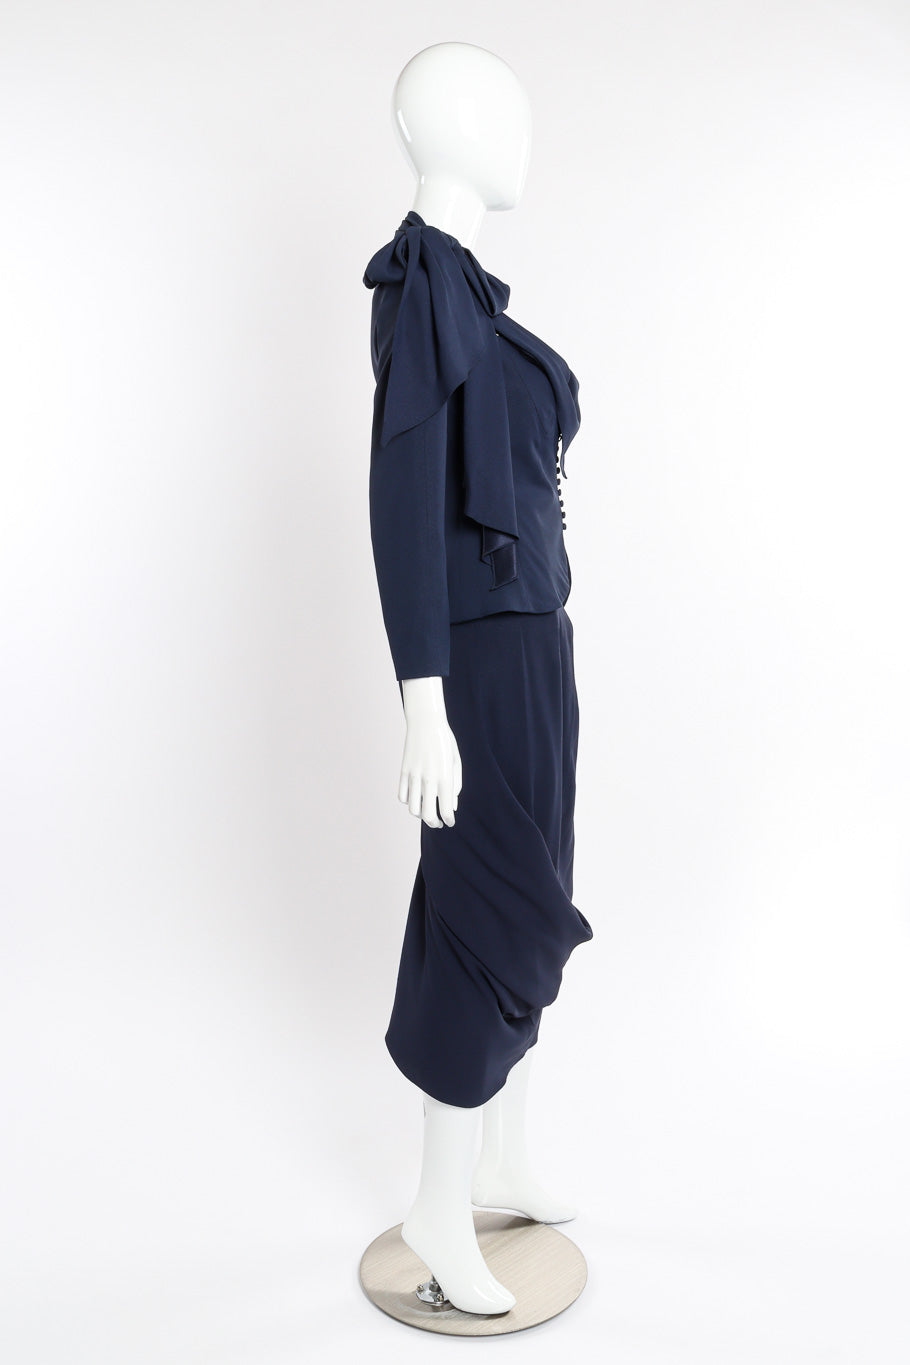 Vintage John Galliano 1999 S/S Draped Jacket and Skirt Set side view on mannequin @recessla